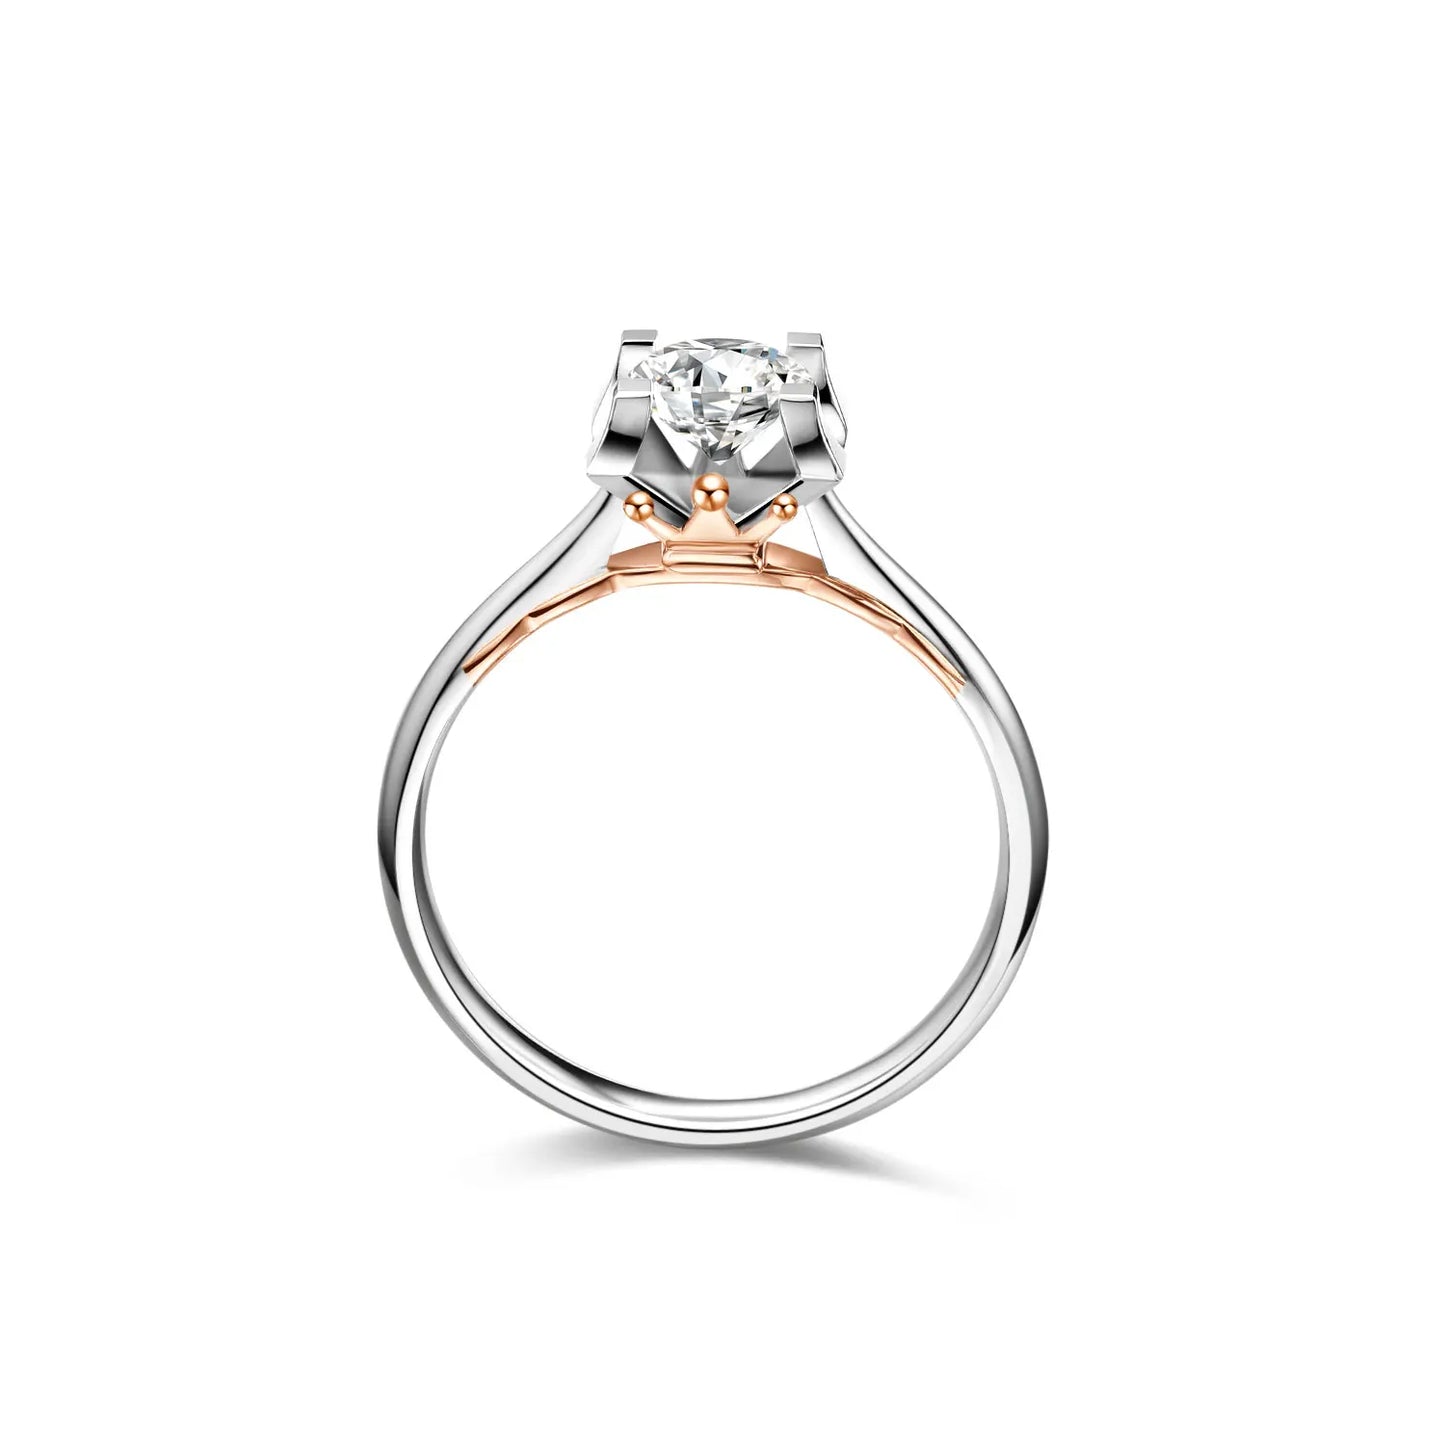 0.5 - 1.5ct Diamond Ring with Rose Gold Crown Bridge in 18K Solid White Gold